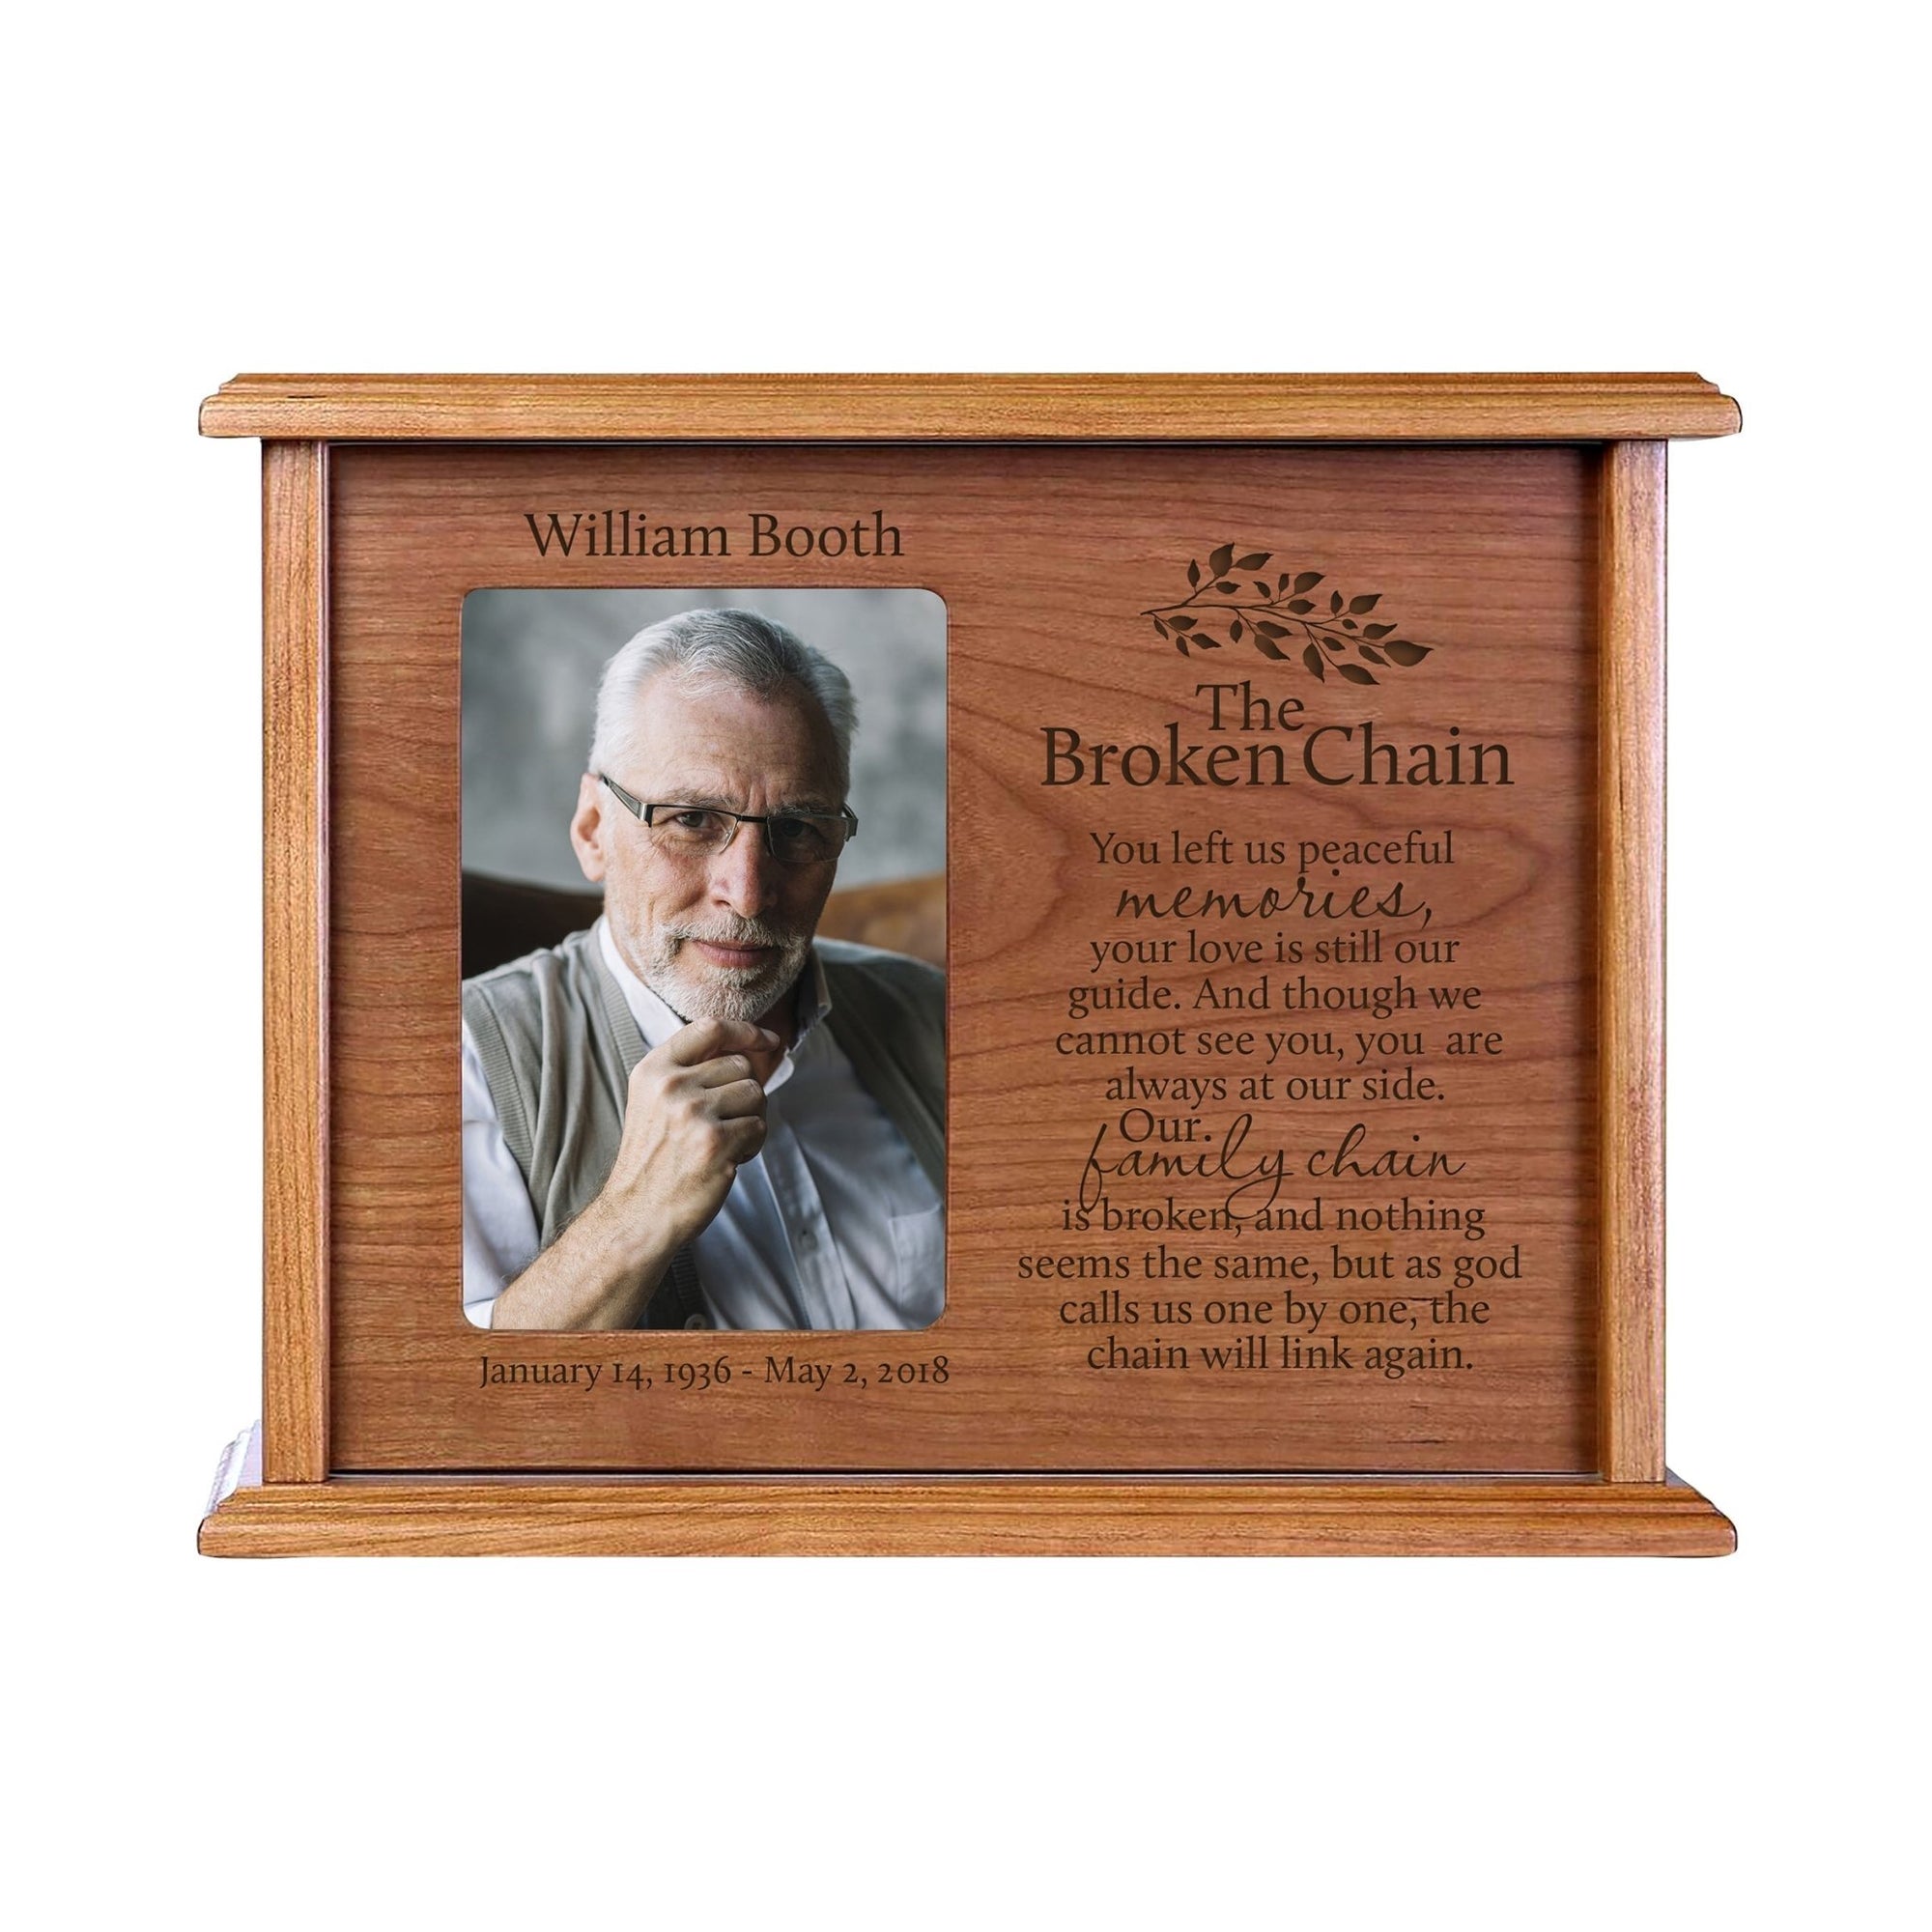 Personalized Memorial Cremation Wooden Urn Box with 4x6 Photo holds 200 cu in The Broken Chain - LifeSong Milestones